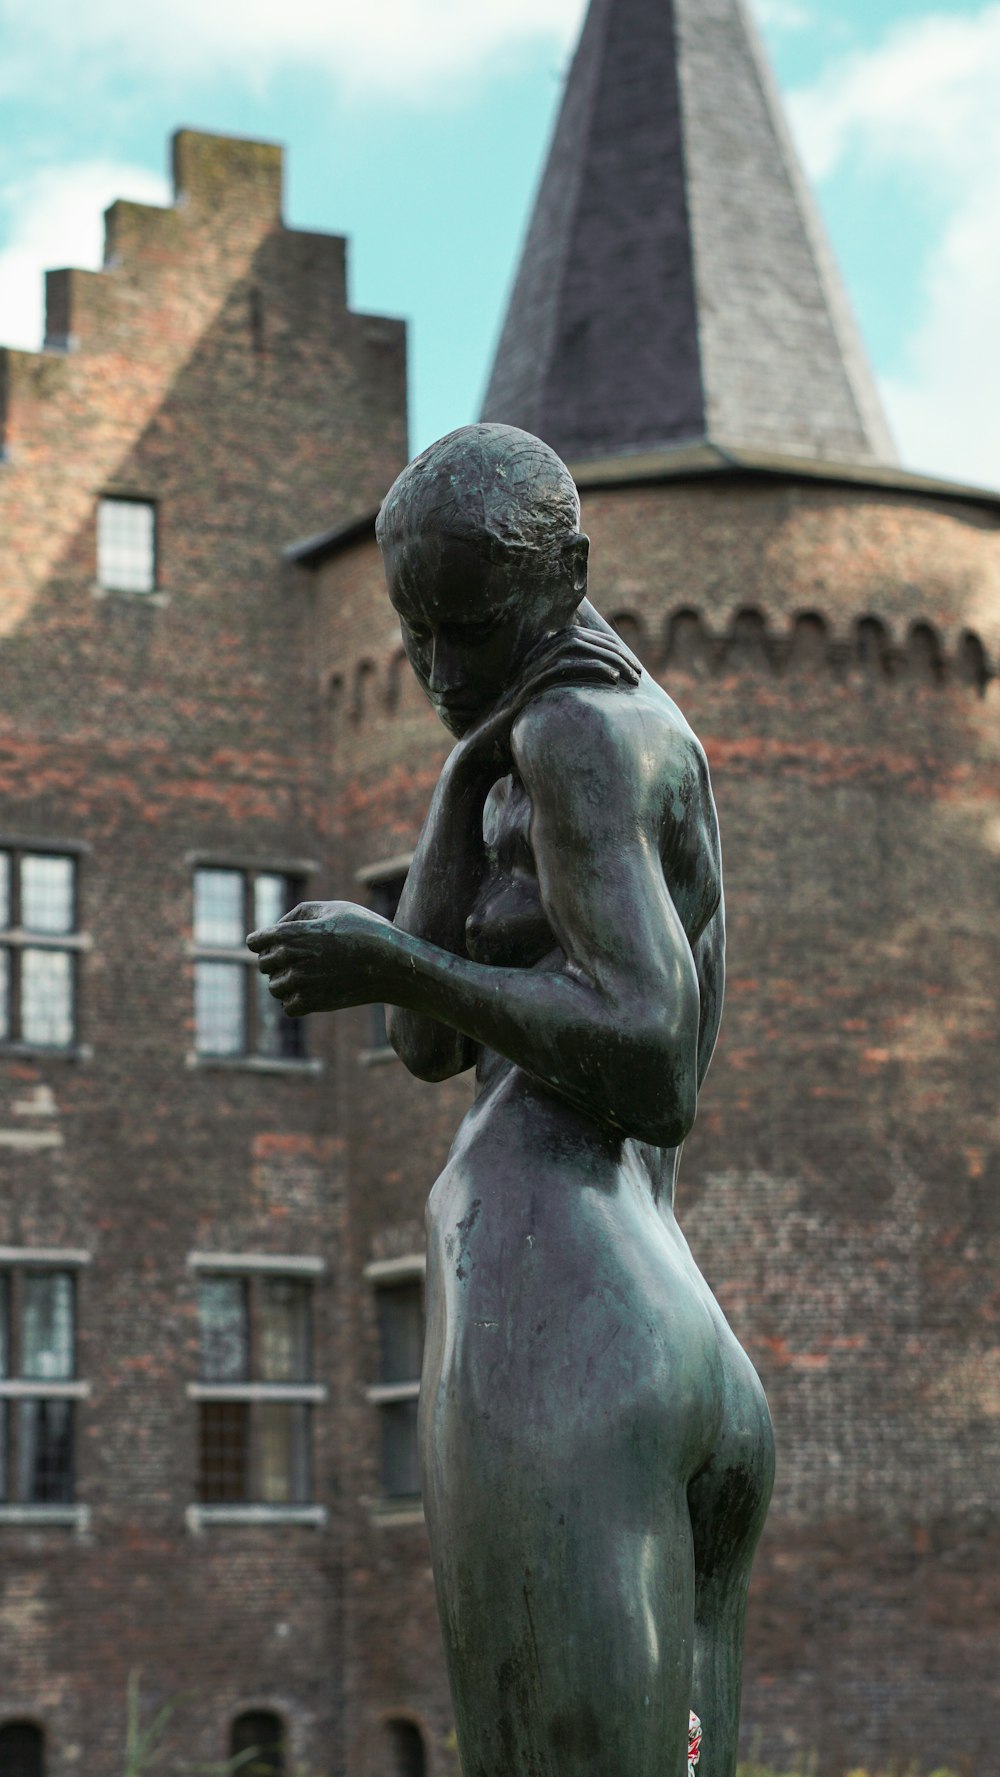 a statue of a woman holding a bird in front of a building